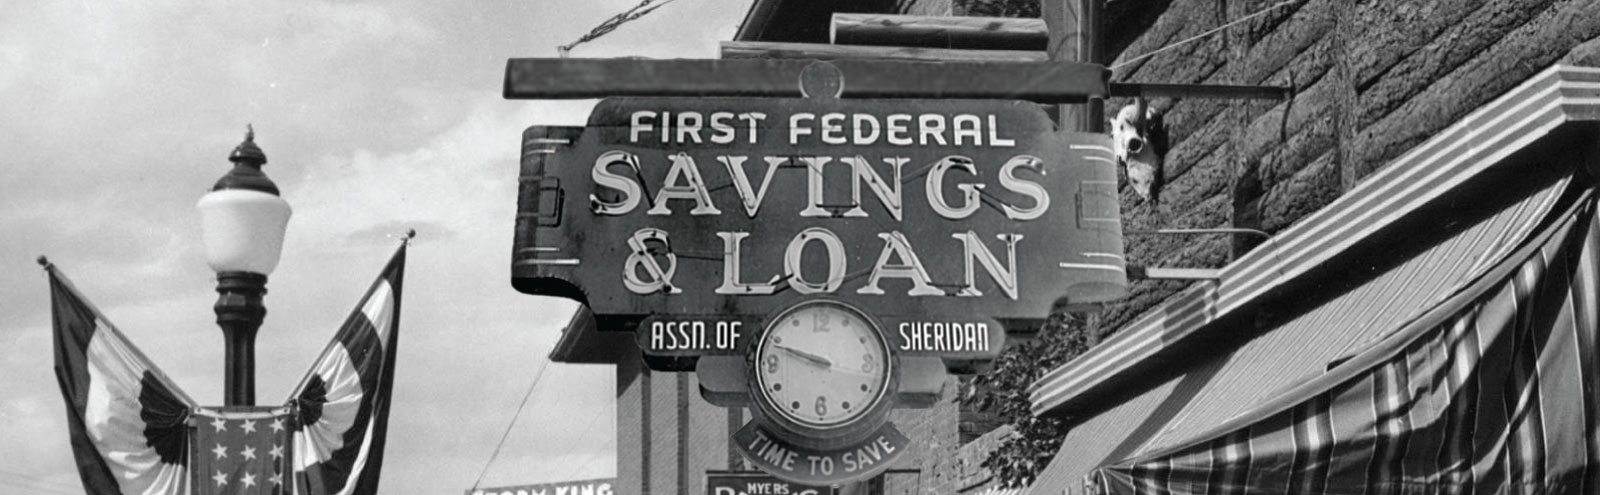 Black and white photo of the First Federal Savings & Loan sign on Main St. in the 1930s.